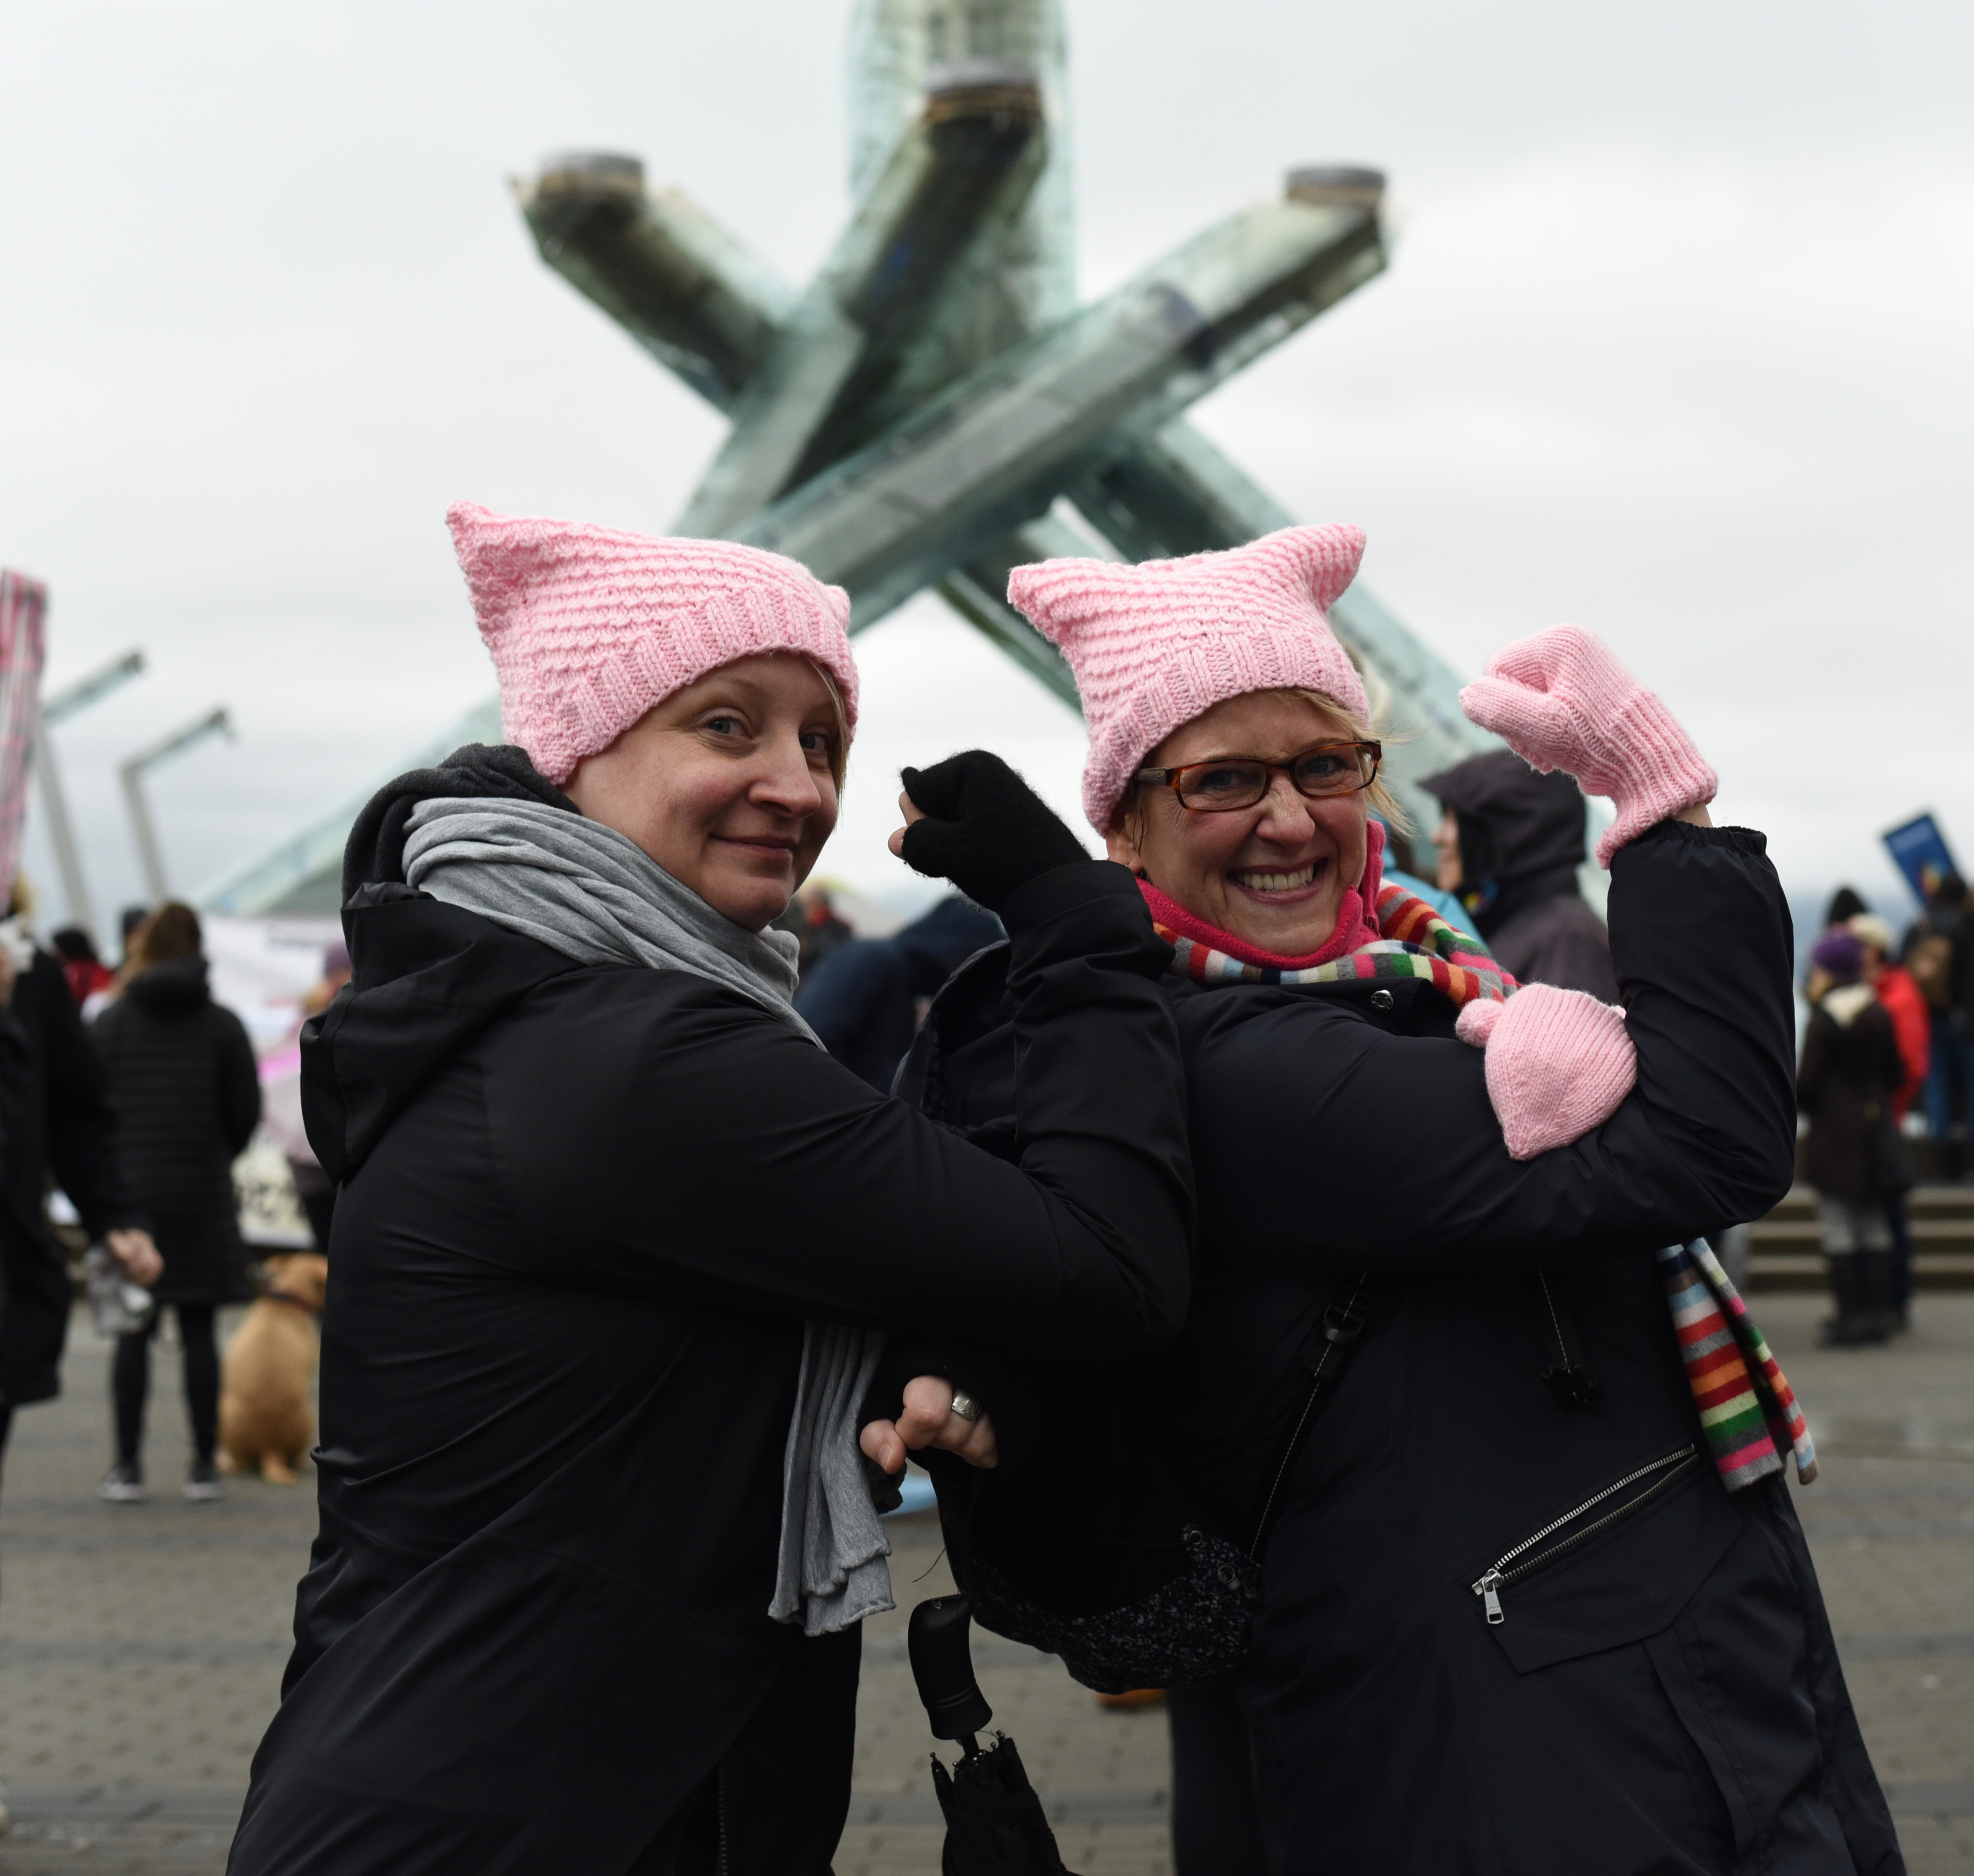 The “pink pussy“ hats worn during the Womens' March last year have been controversial with organizers and marchers in recent months but were still a common sight on Saturday.